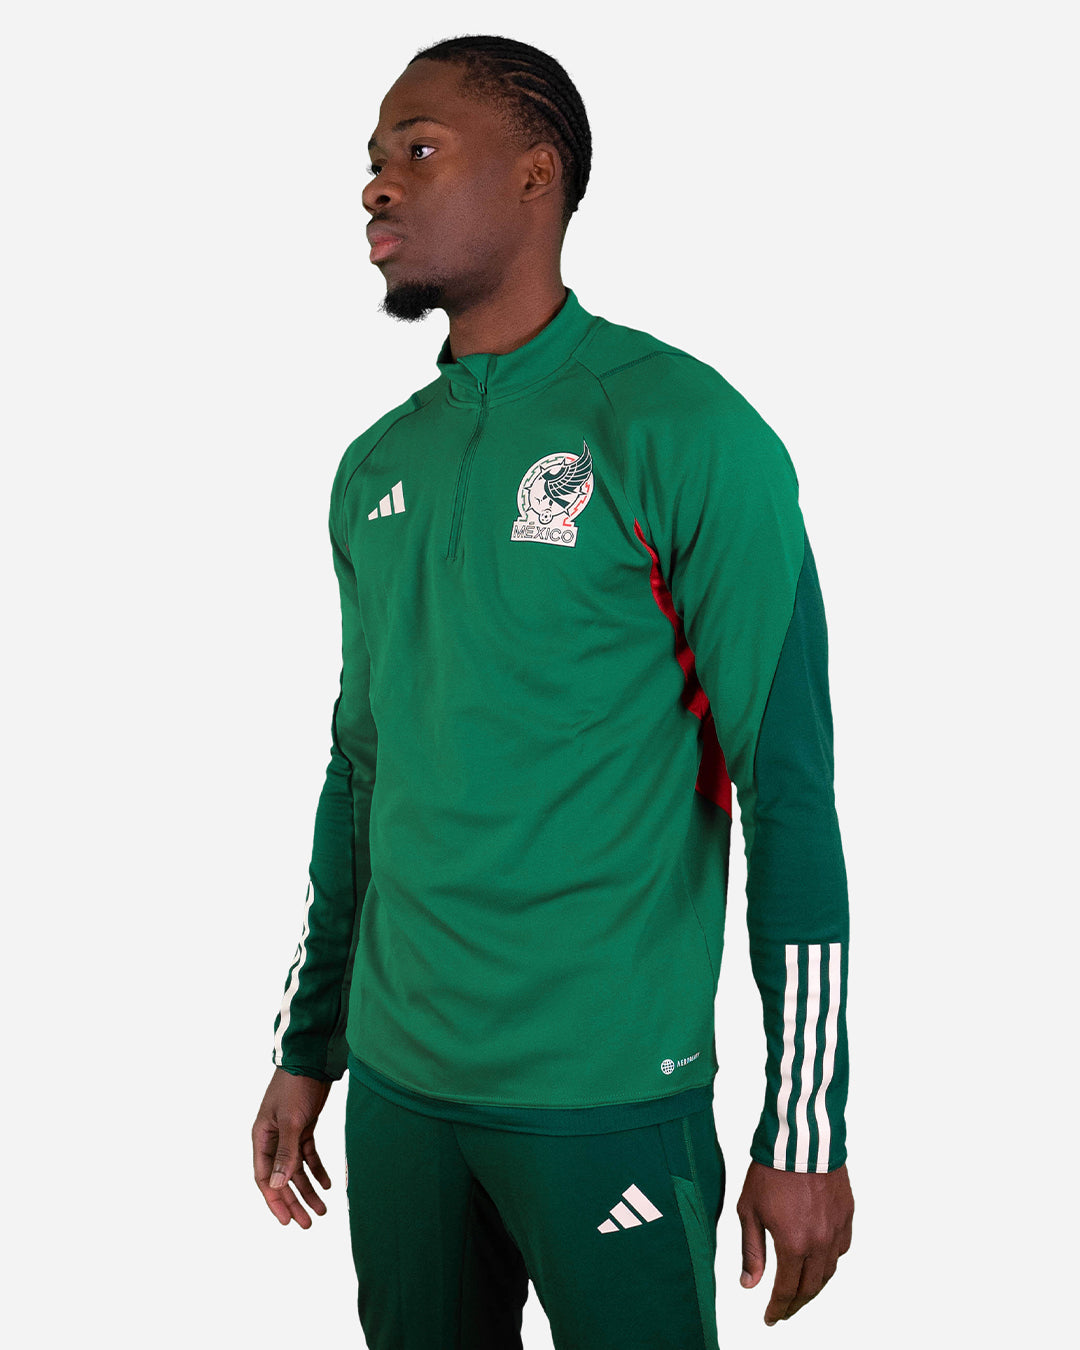 Mexico 2022 training top - Green/White